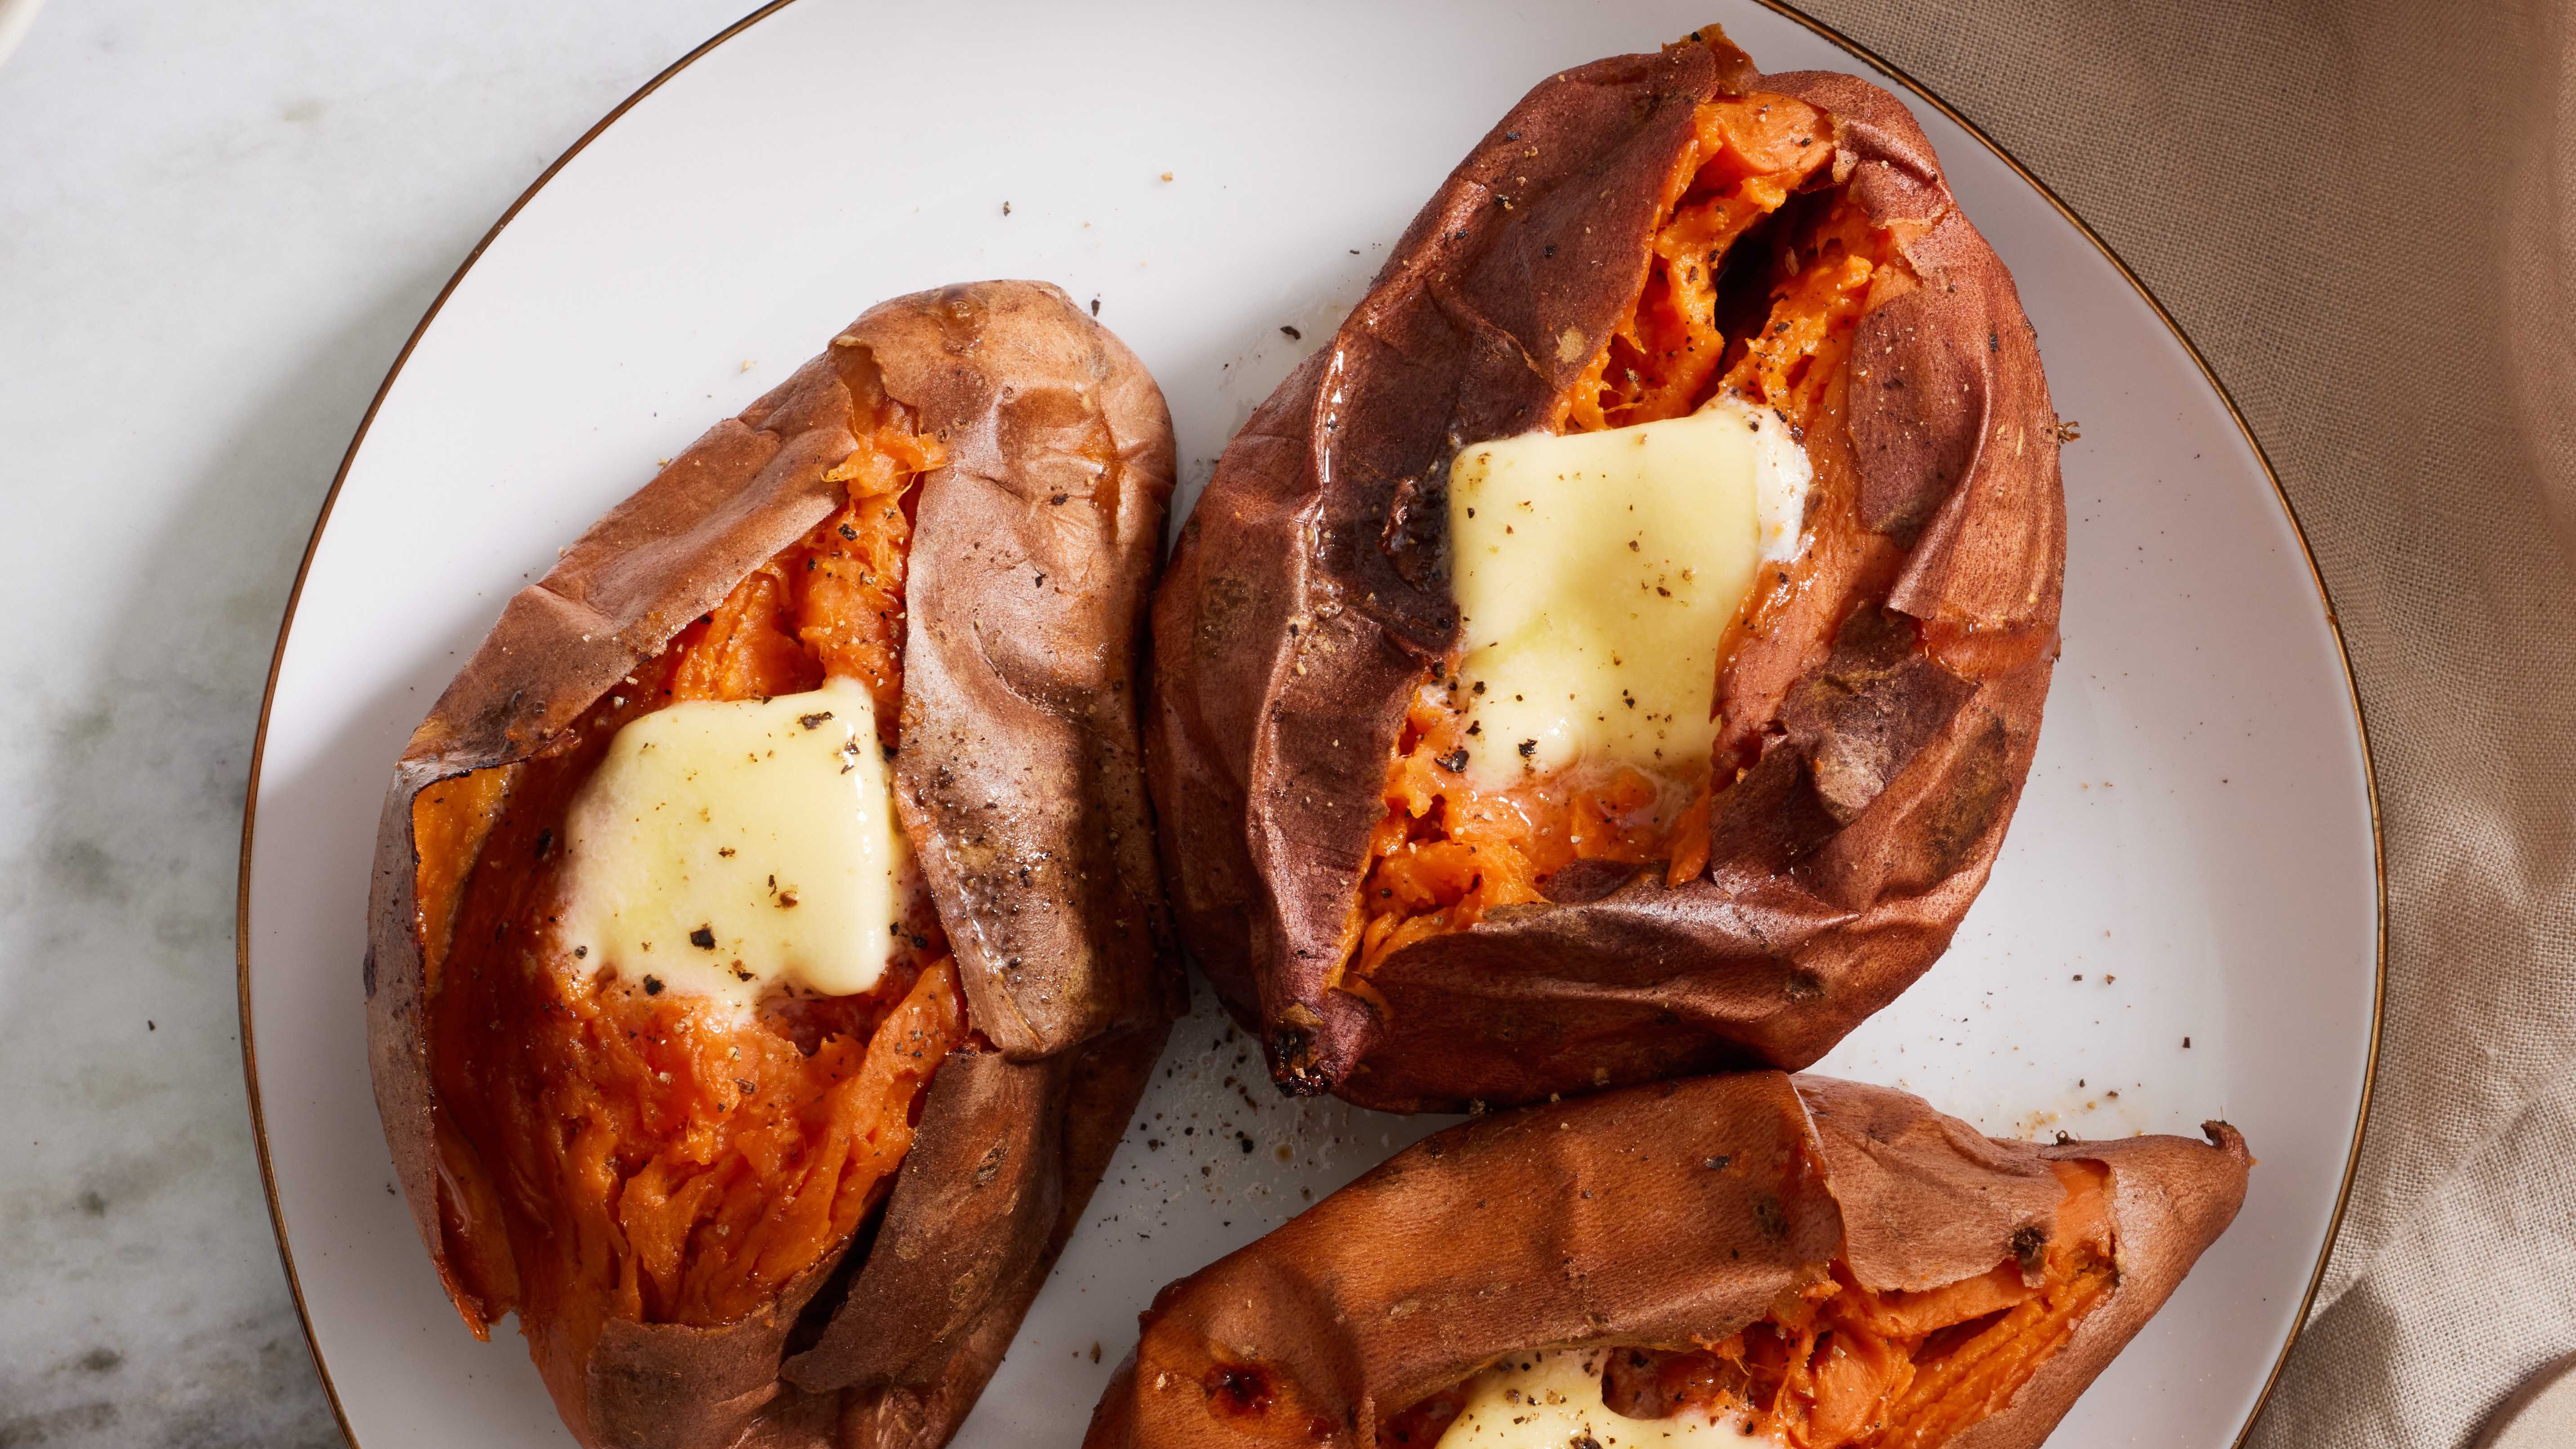 https://hips.hearstapps.com/hmg-prod/images/delish-perfect-baked-sweet-potato-1637646118.jpg?crop=1xw:0.7635071090047393xh;center,top